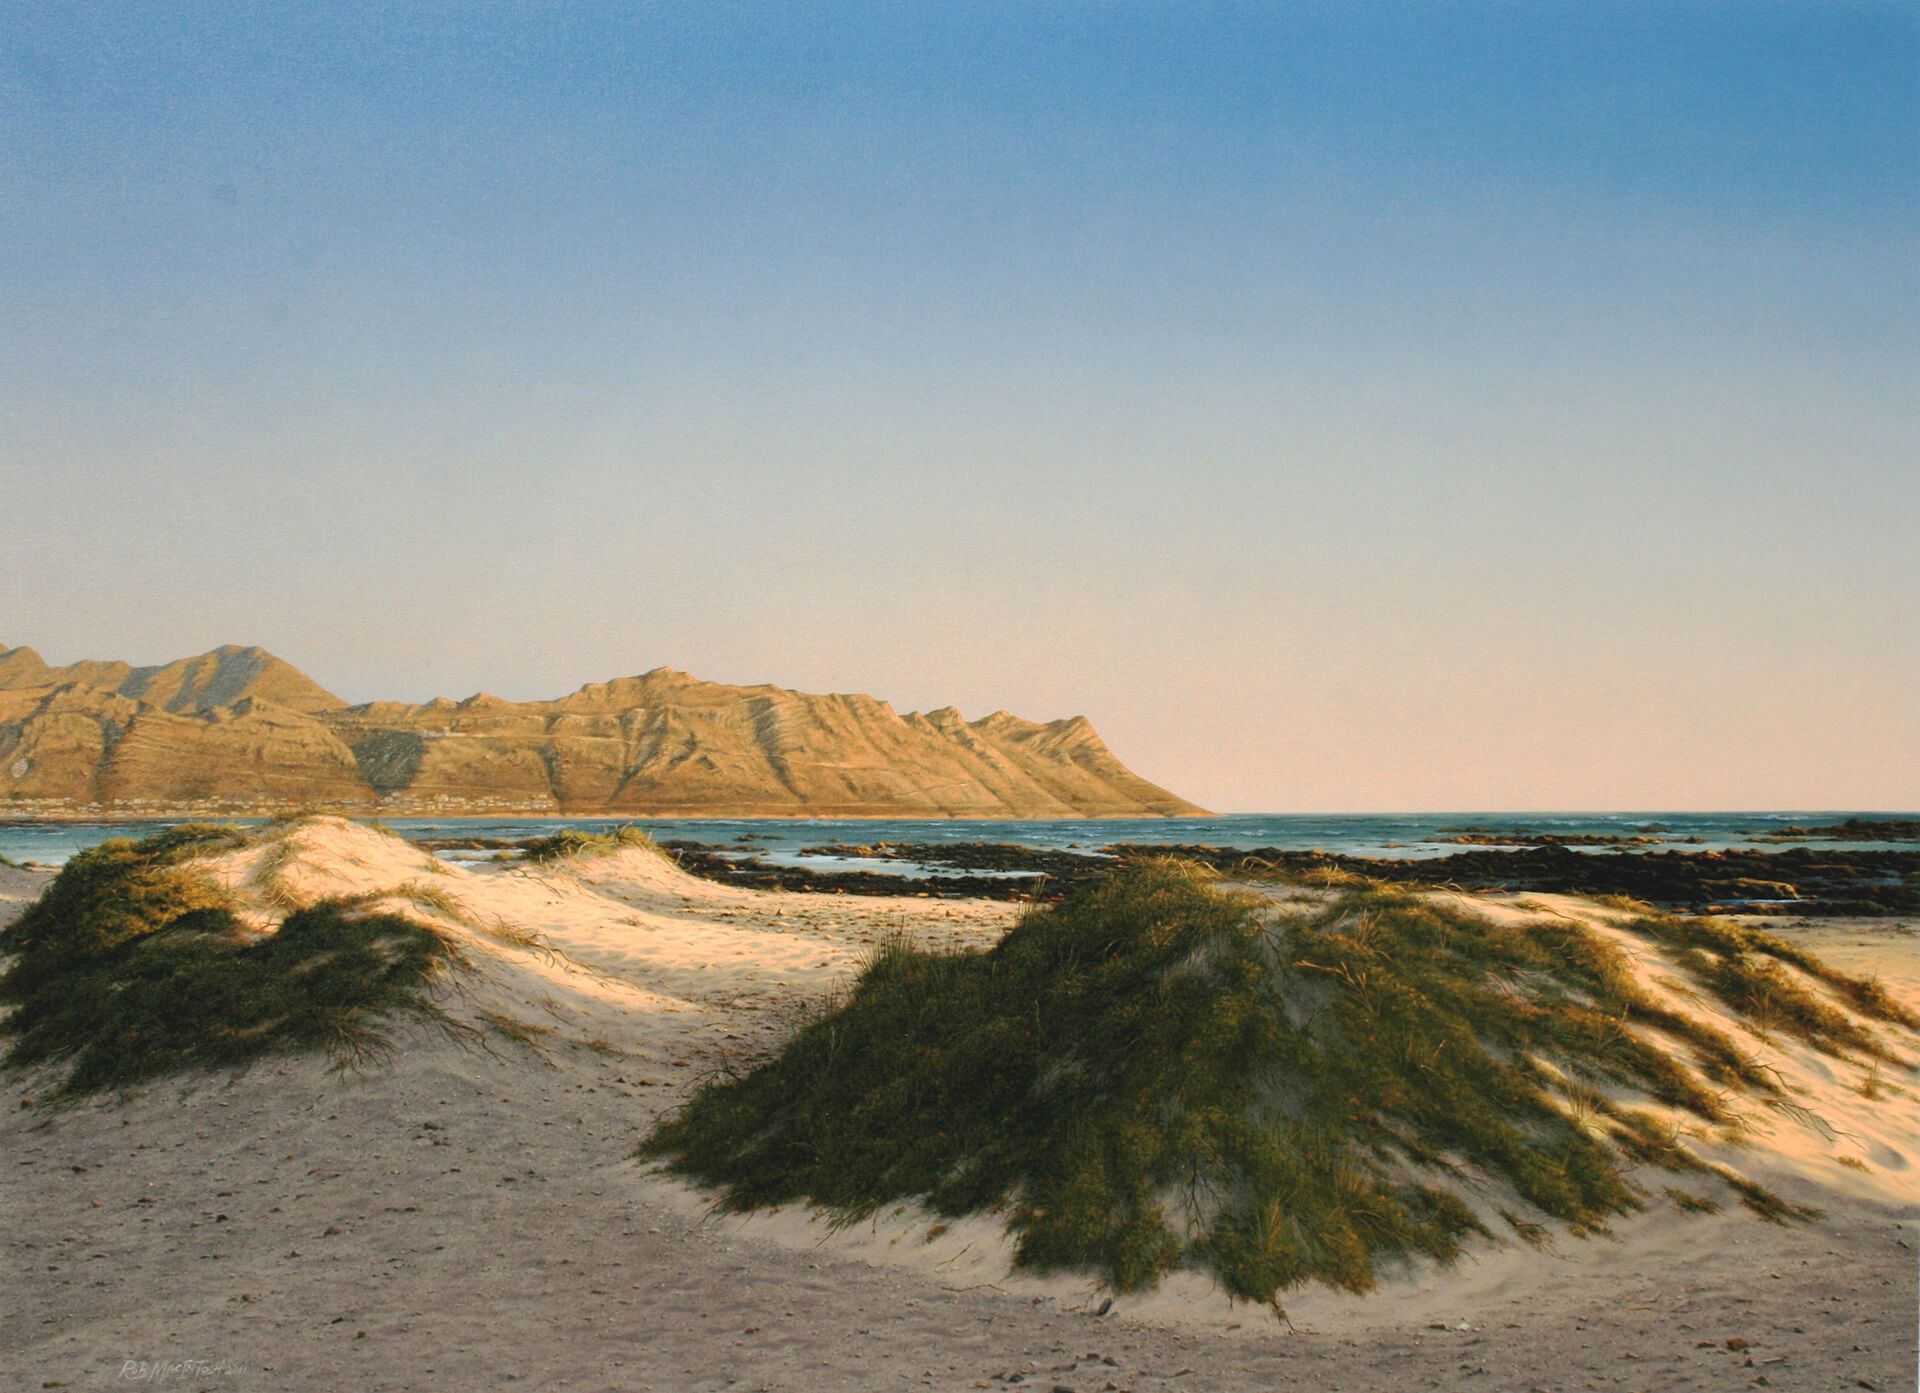 Photorealistic painting of a dry beach at low tide